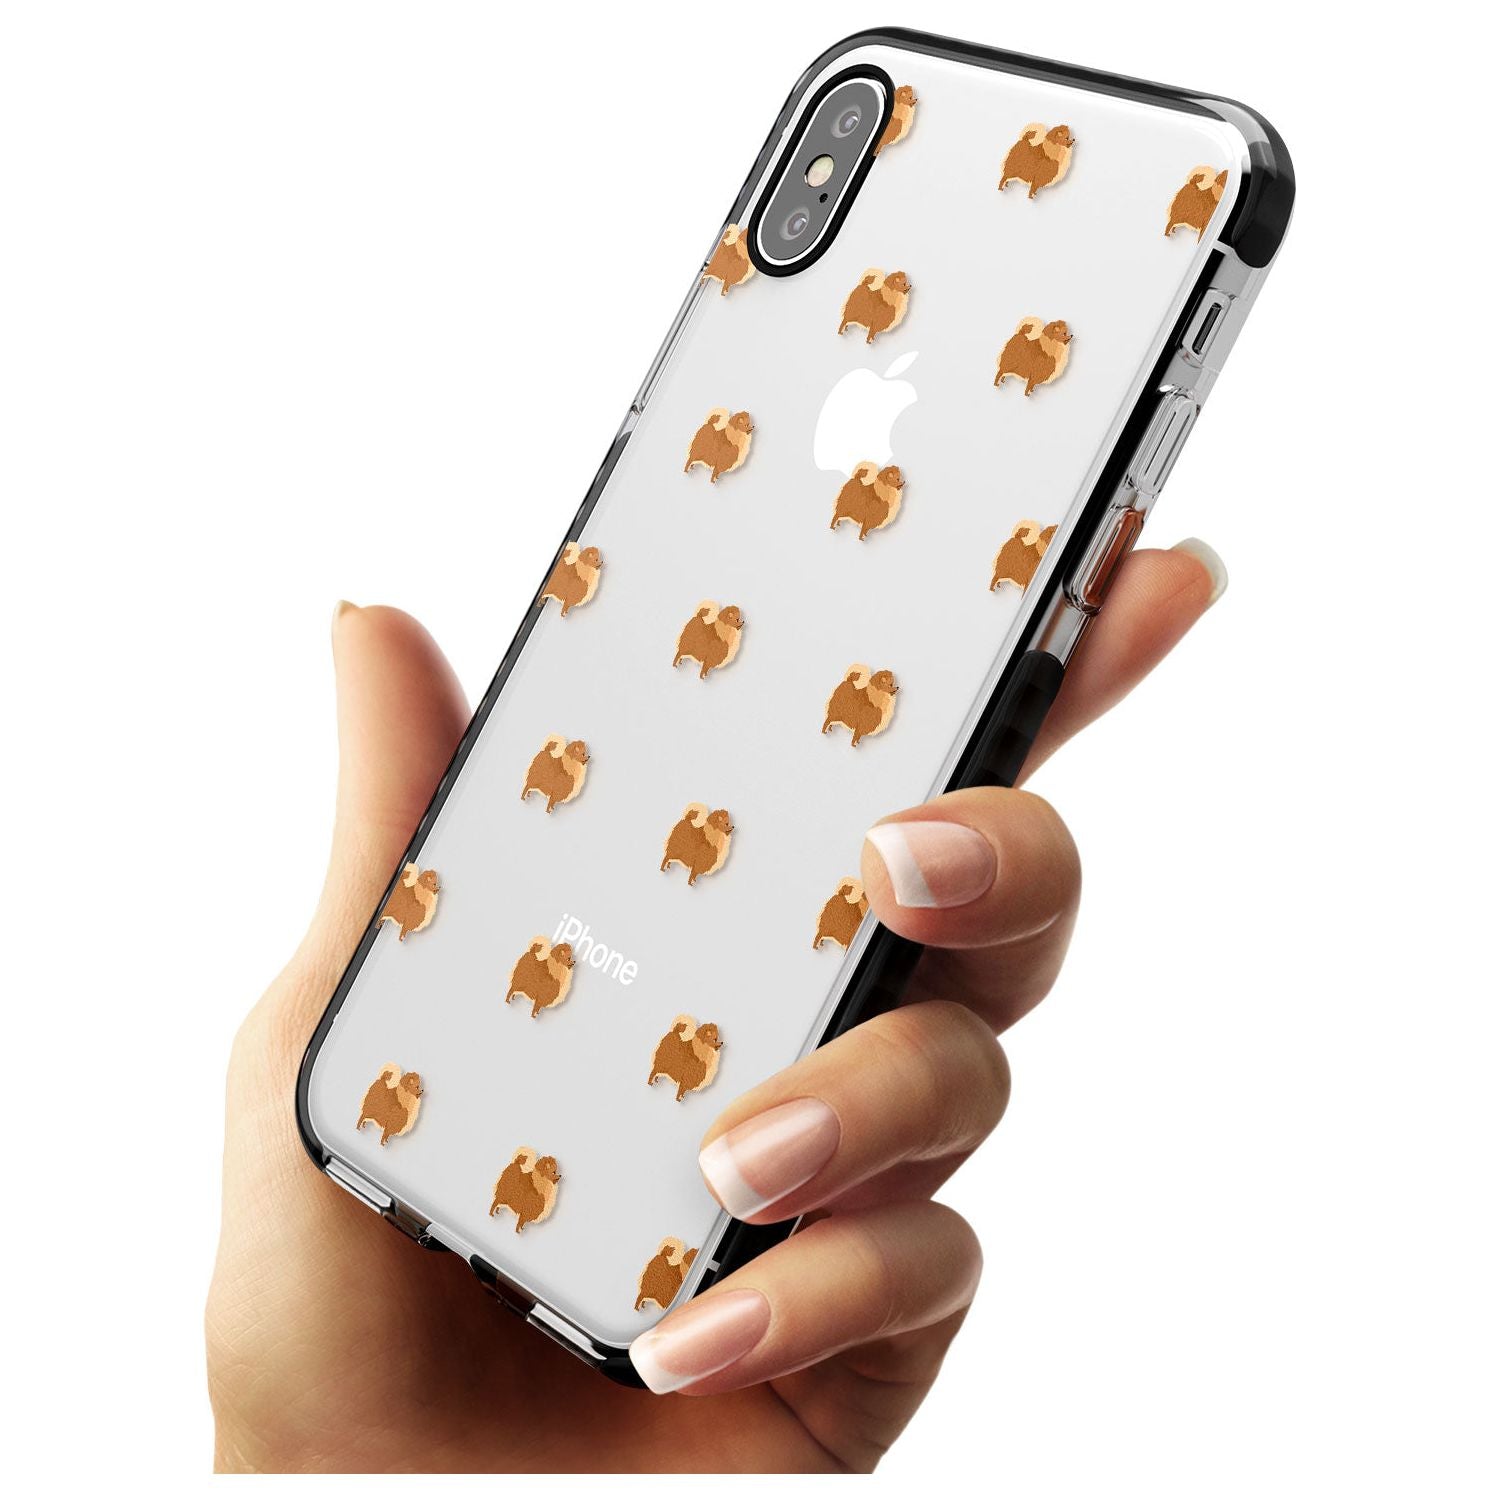 Pomeranian Dog Pattern Clear Black Impact Phone Case for iPhone X XS Max XR